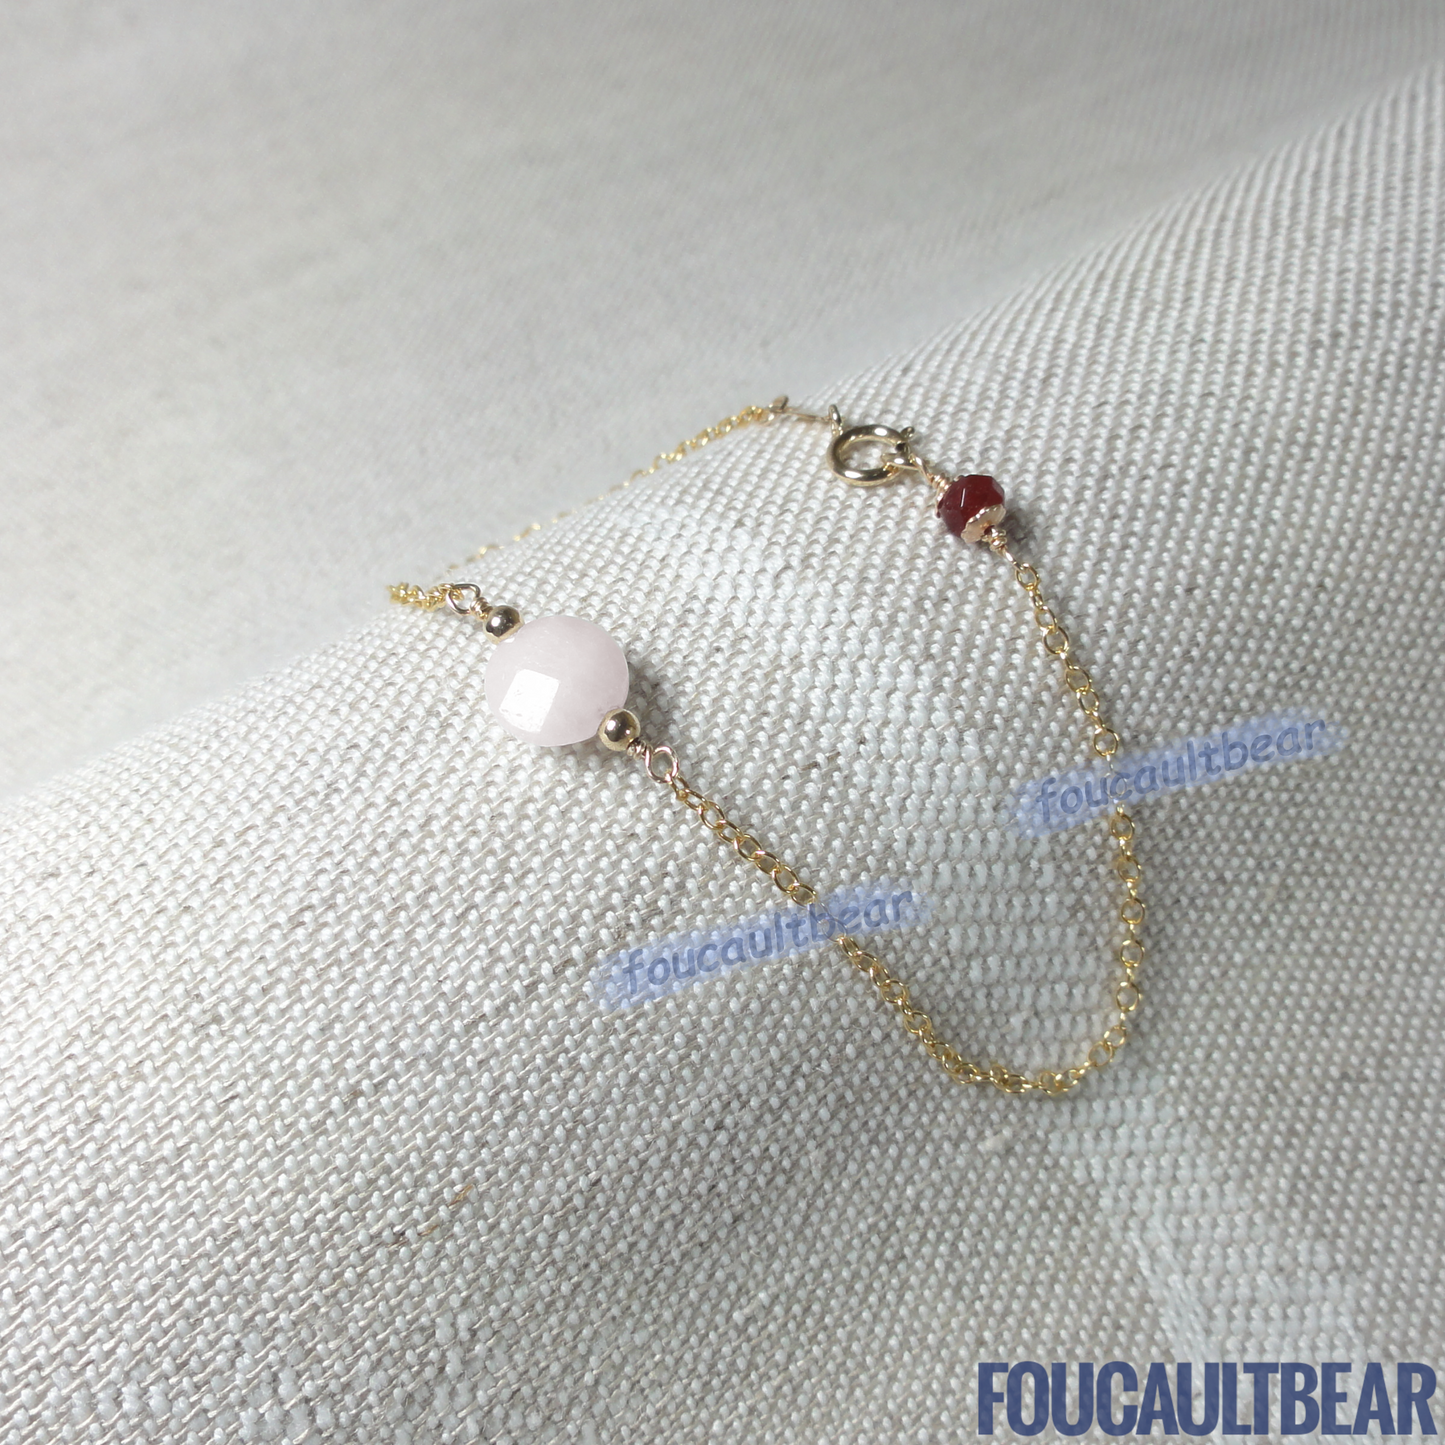 Foucaultbear's HANDCRAFTED BRACELET. Natural Pale Pink Opal & Ruby Gemstone. All 14kt Gold-Filled Components. Custom Lengths Available. Natural Pale Pink Opal & Ruby Gemstone with 14kt Gold-Filled Bracelet is simple yet exudes subtle elegance to your wardrobe. Can be worn on casual days and holds up well for dressed-up evenings. Makes for a wonderful wedding party or bridesmaid gift too. Please choose the bracelet length you would like. 